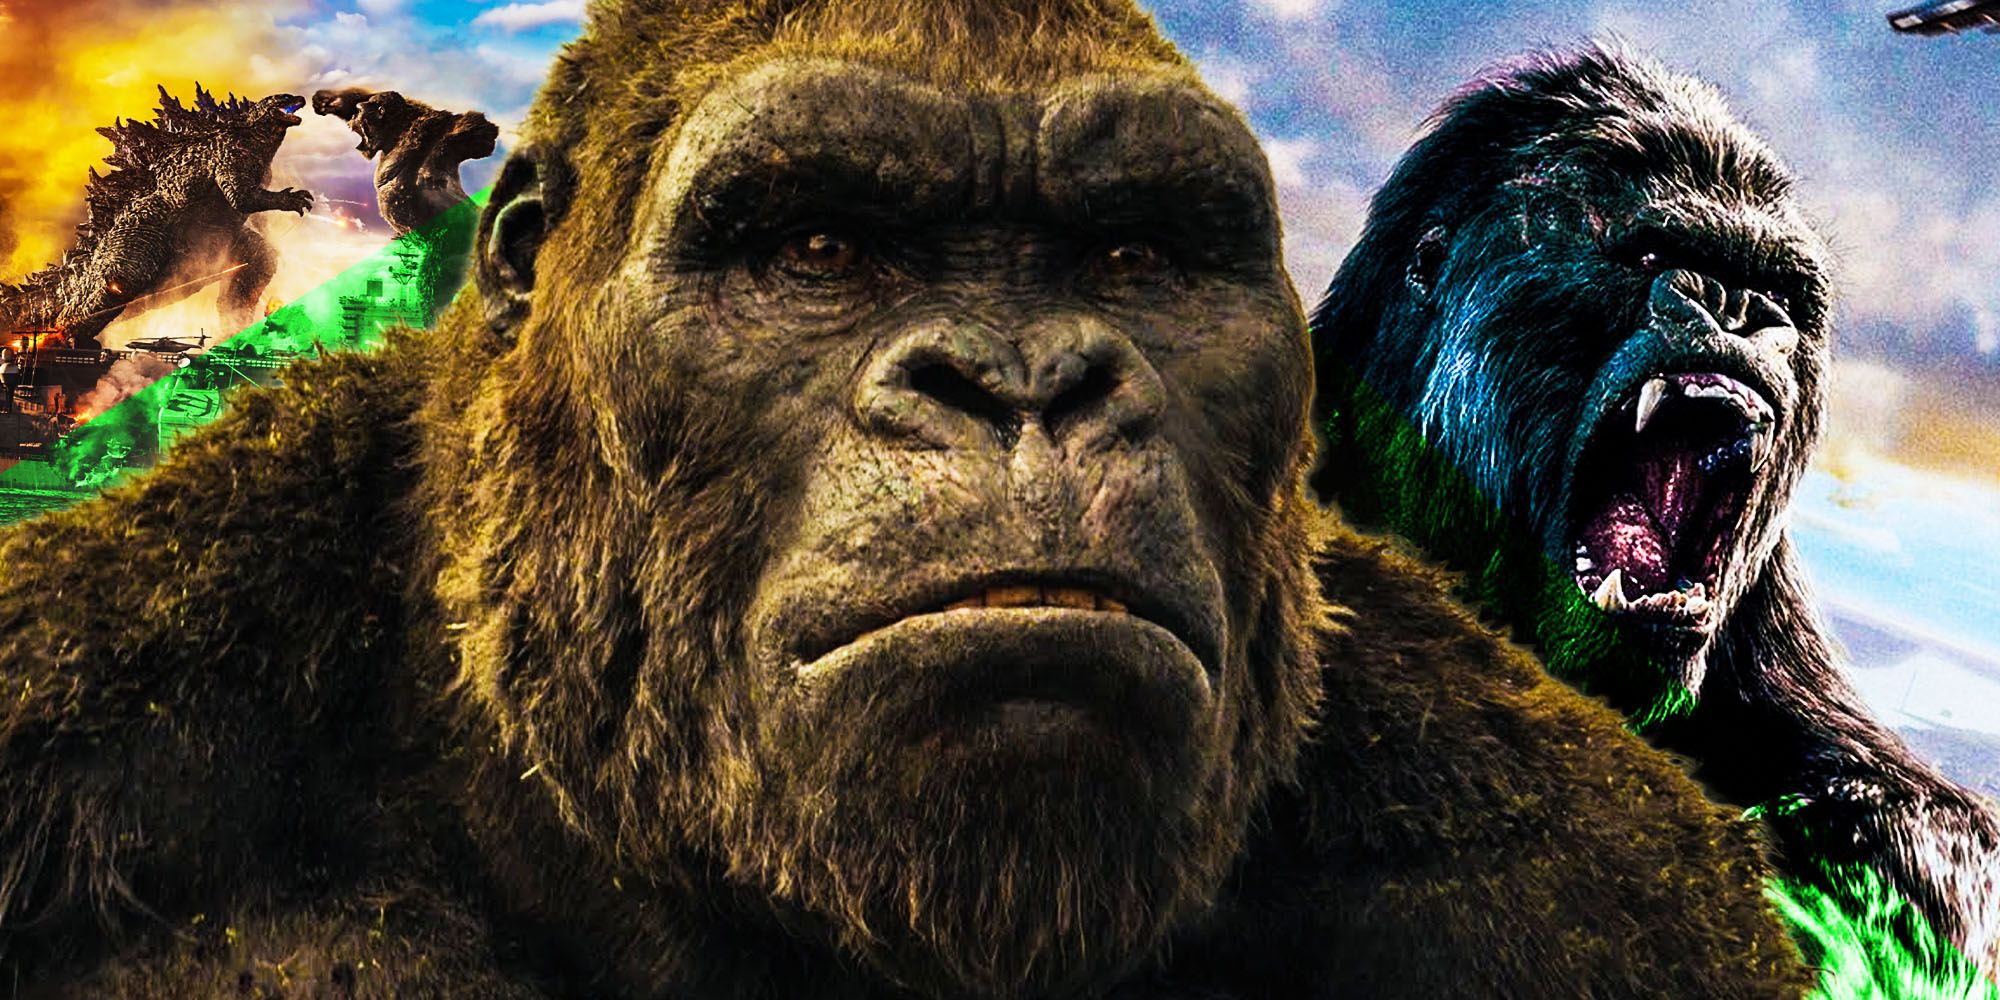 Every King Kong Movie Ranked From Worst to Best